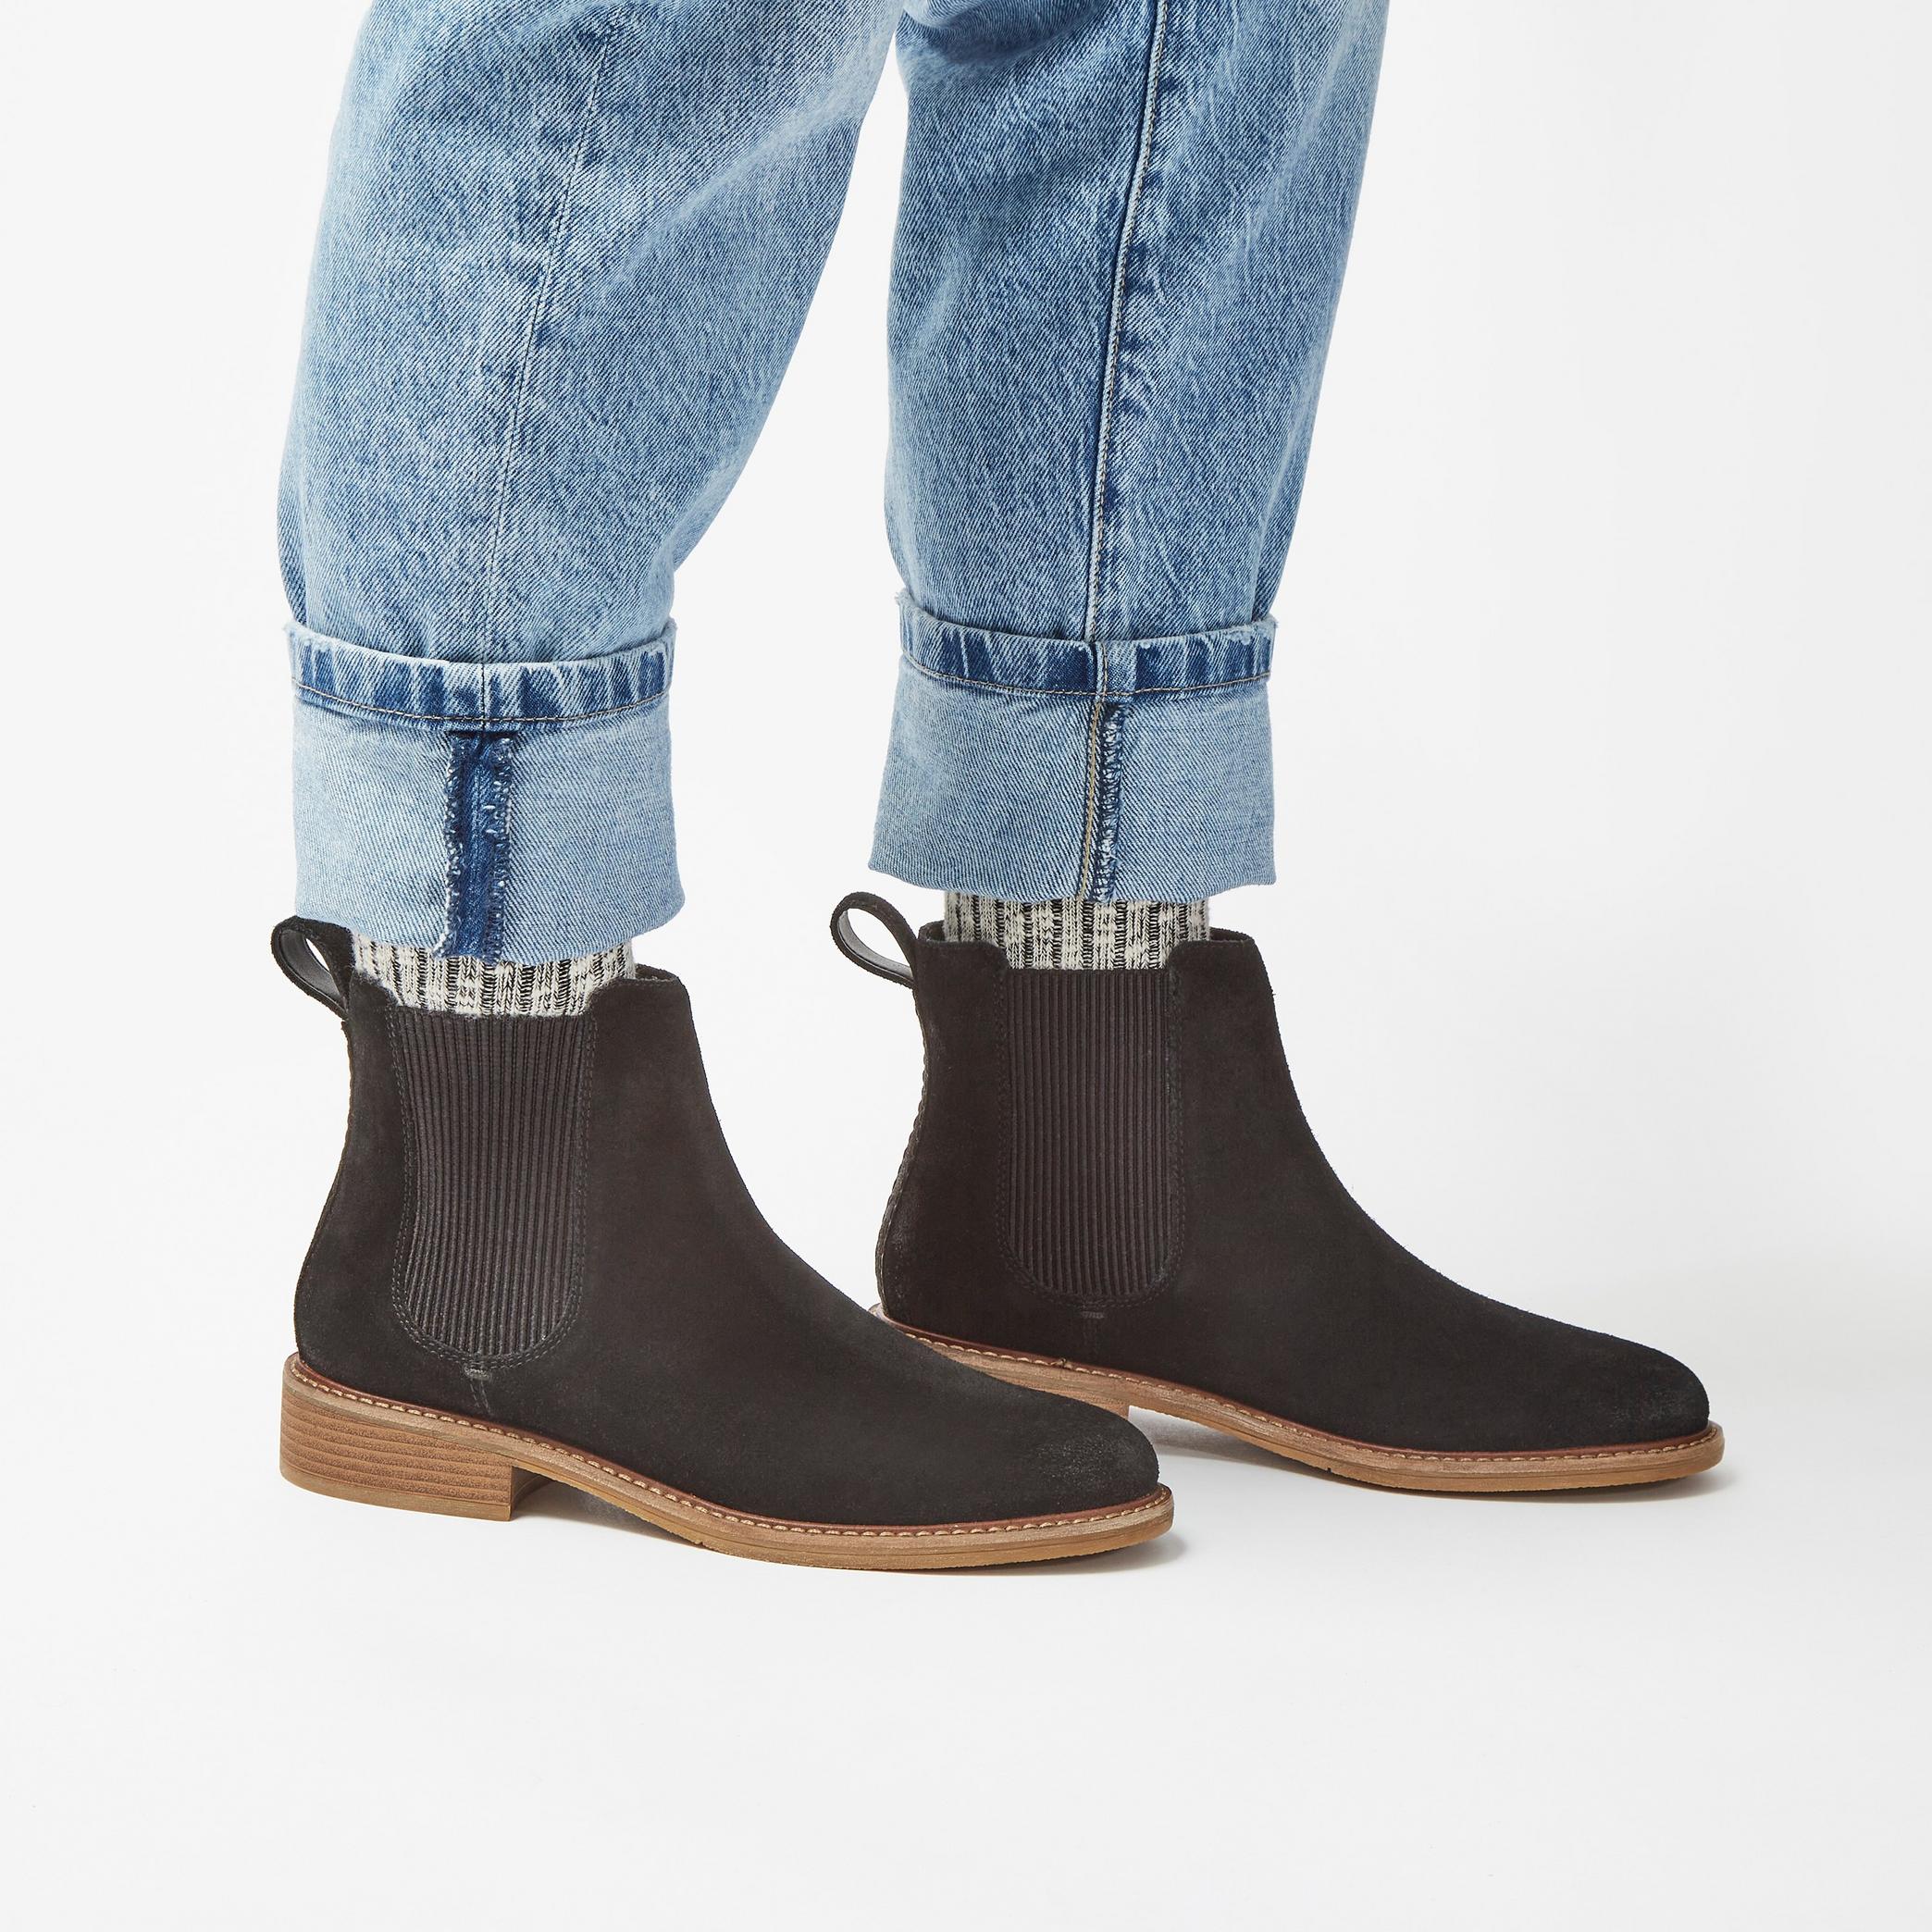 Cologne Arlo 2 Black Suede Chelsea Boots, view 2 of 7